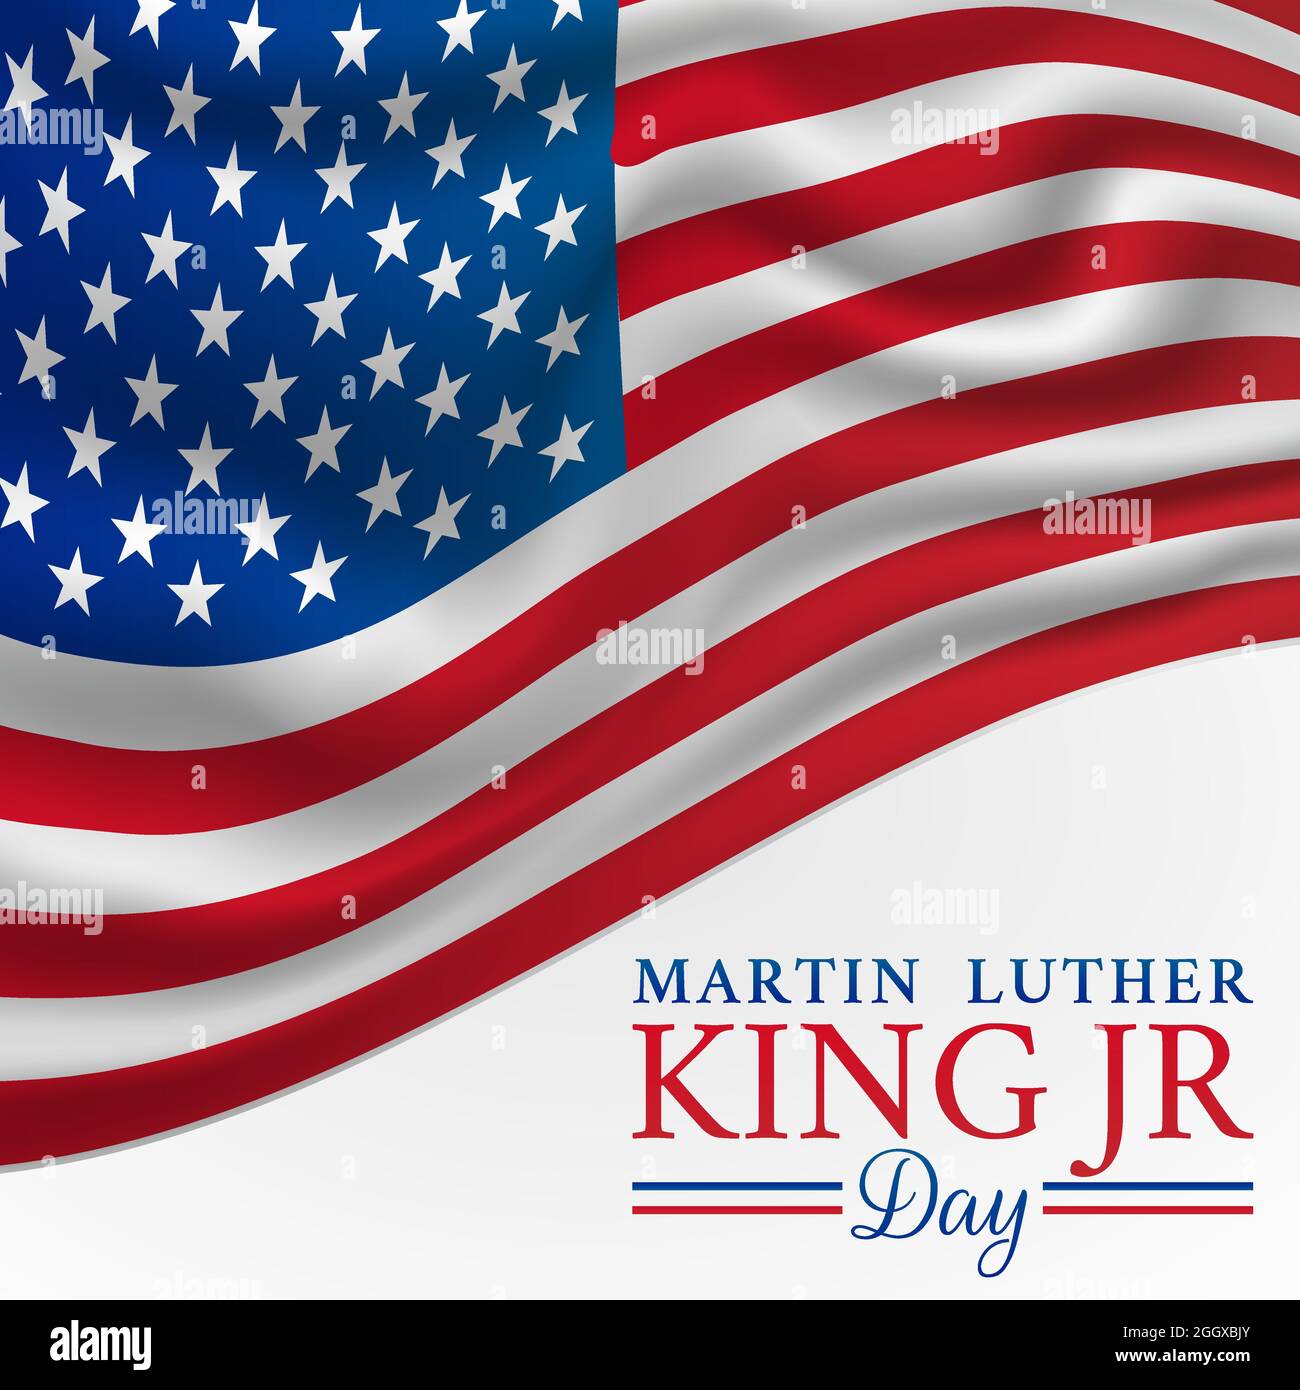 MLK Martin Luther King Jr. Day Vector Illustration Background with American Flag Stock Vector